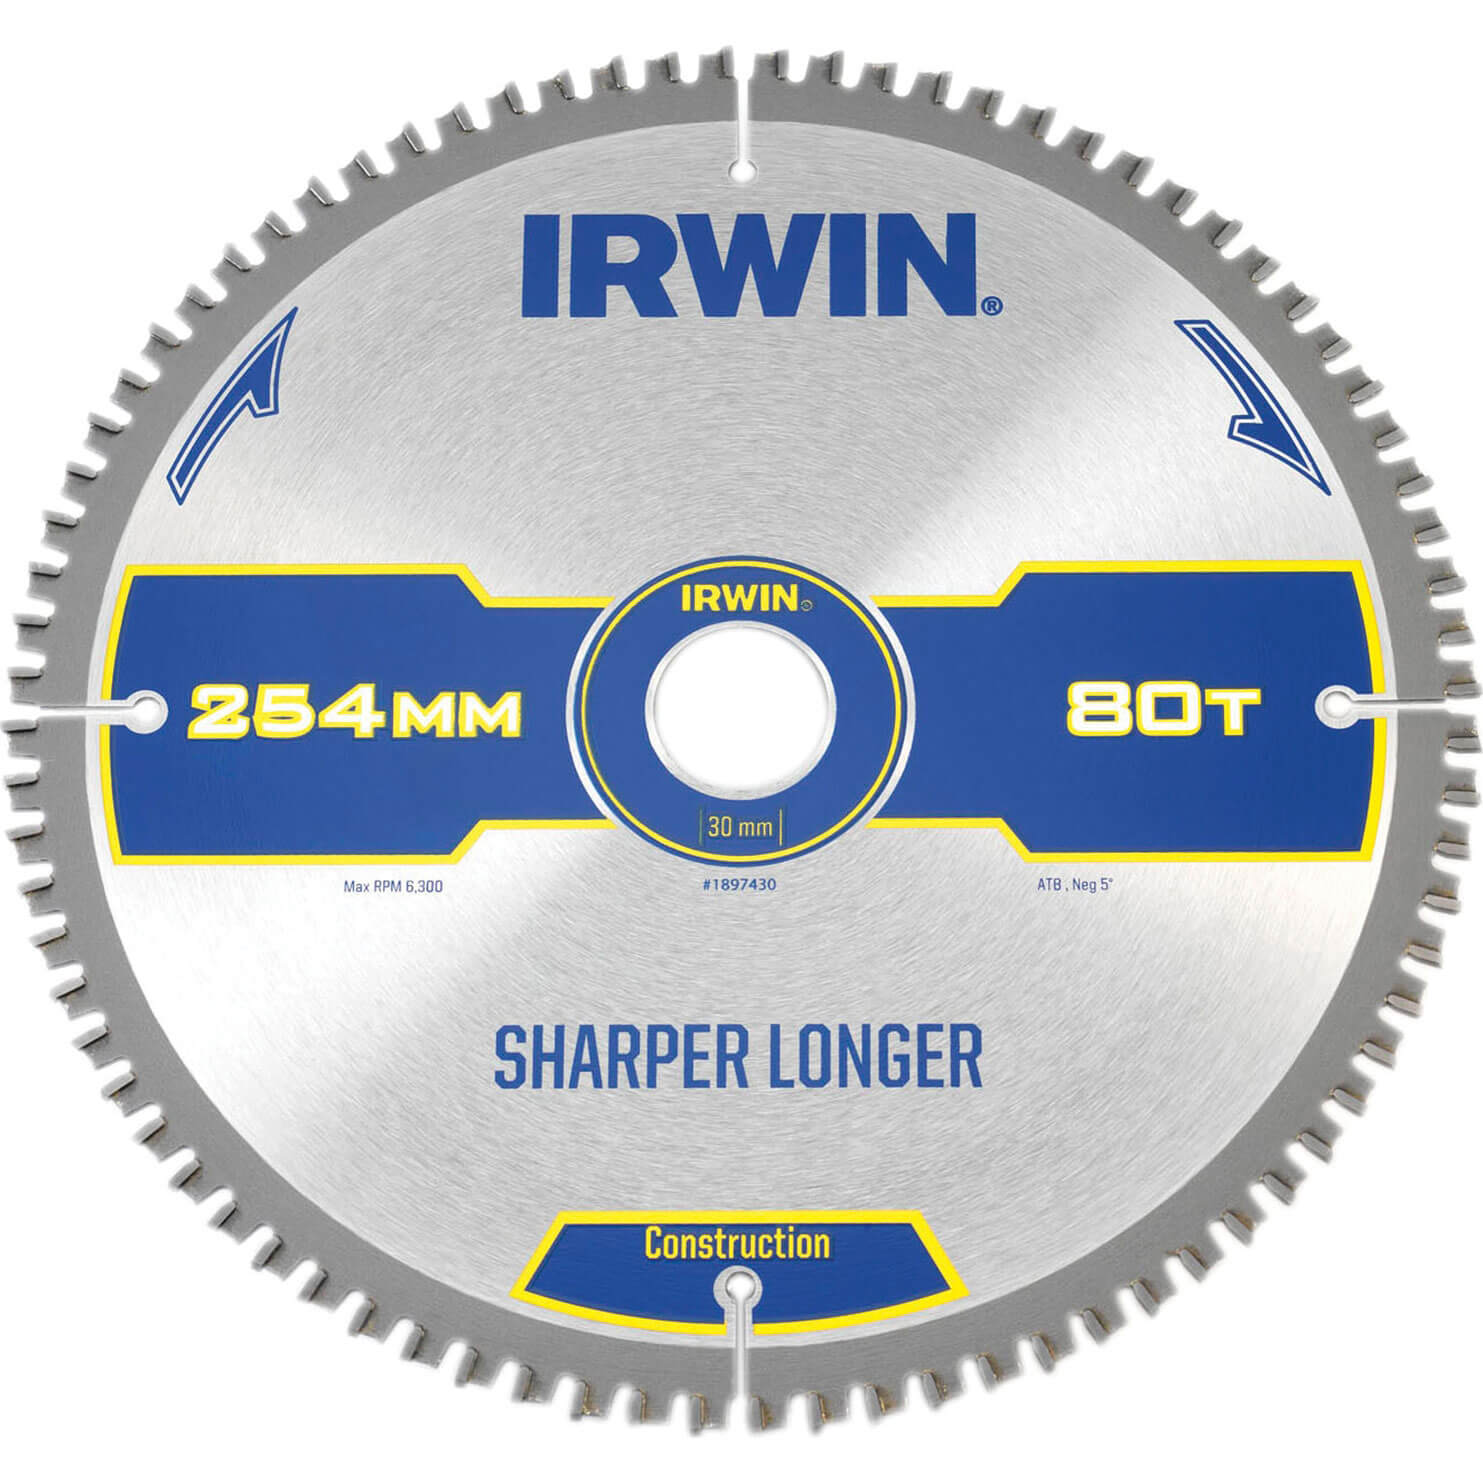 Image of Irwin ATB Ultra Construction Circular Saw Blade 254mm 80T 30mm